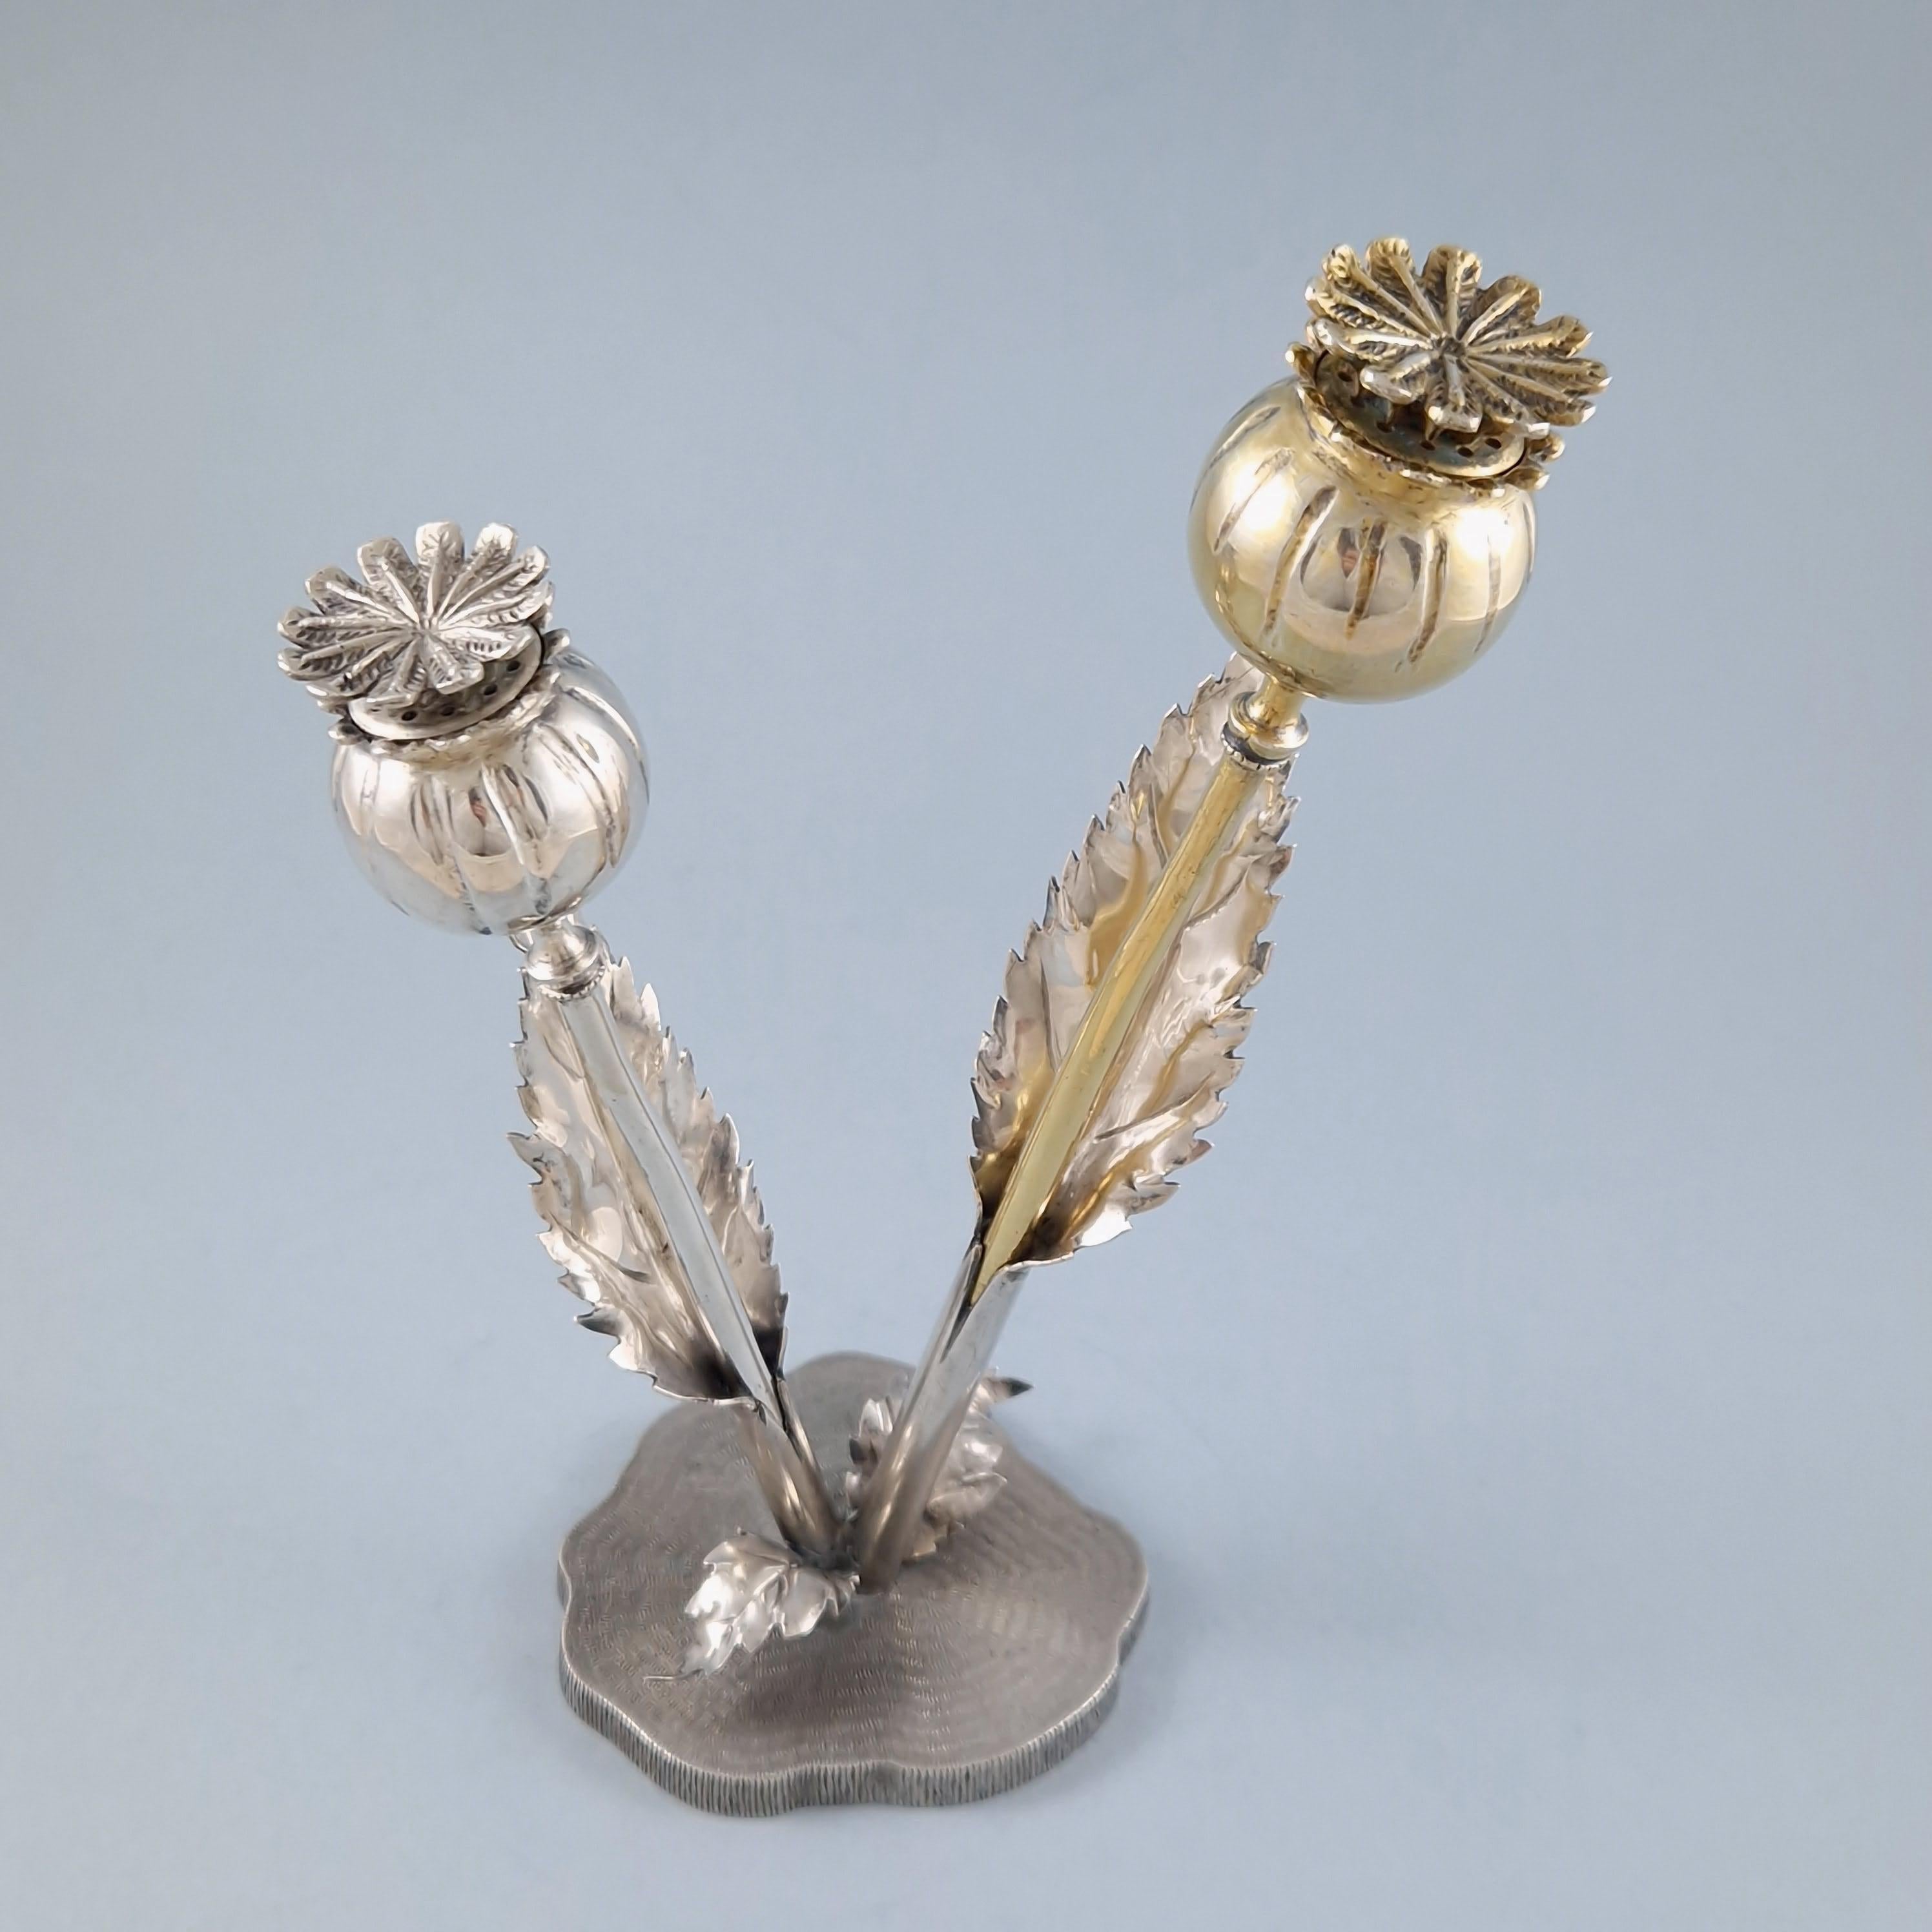 Italian Buccellati Solid Silver Salt and Pepper Shakers